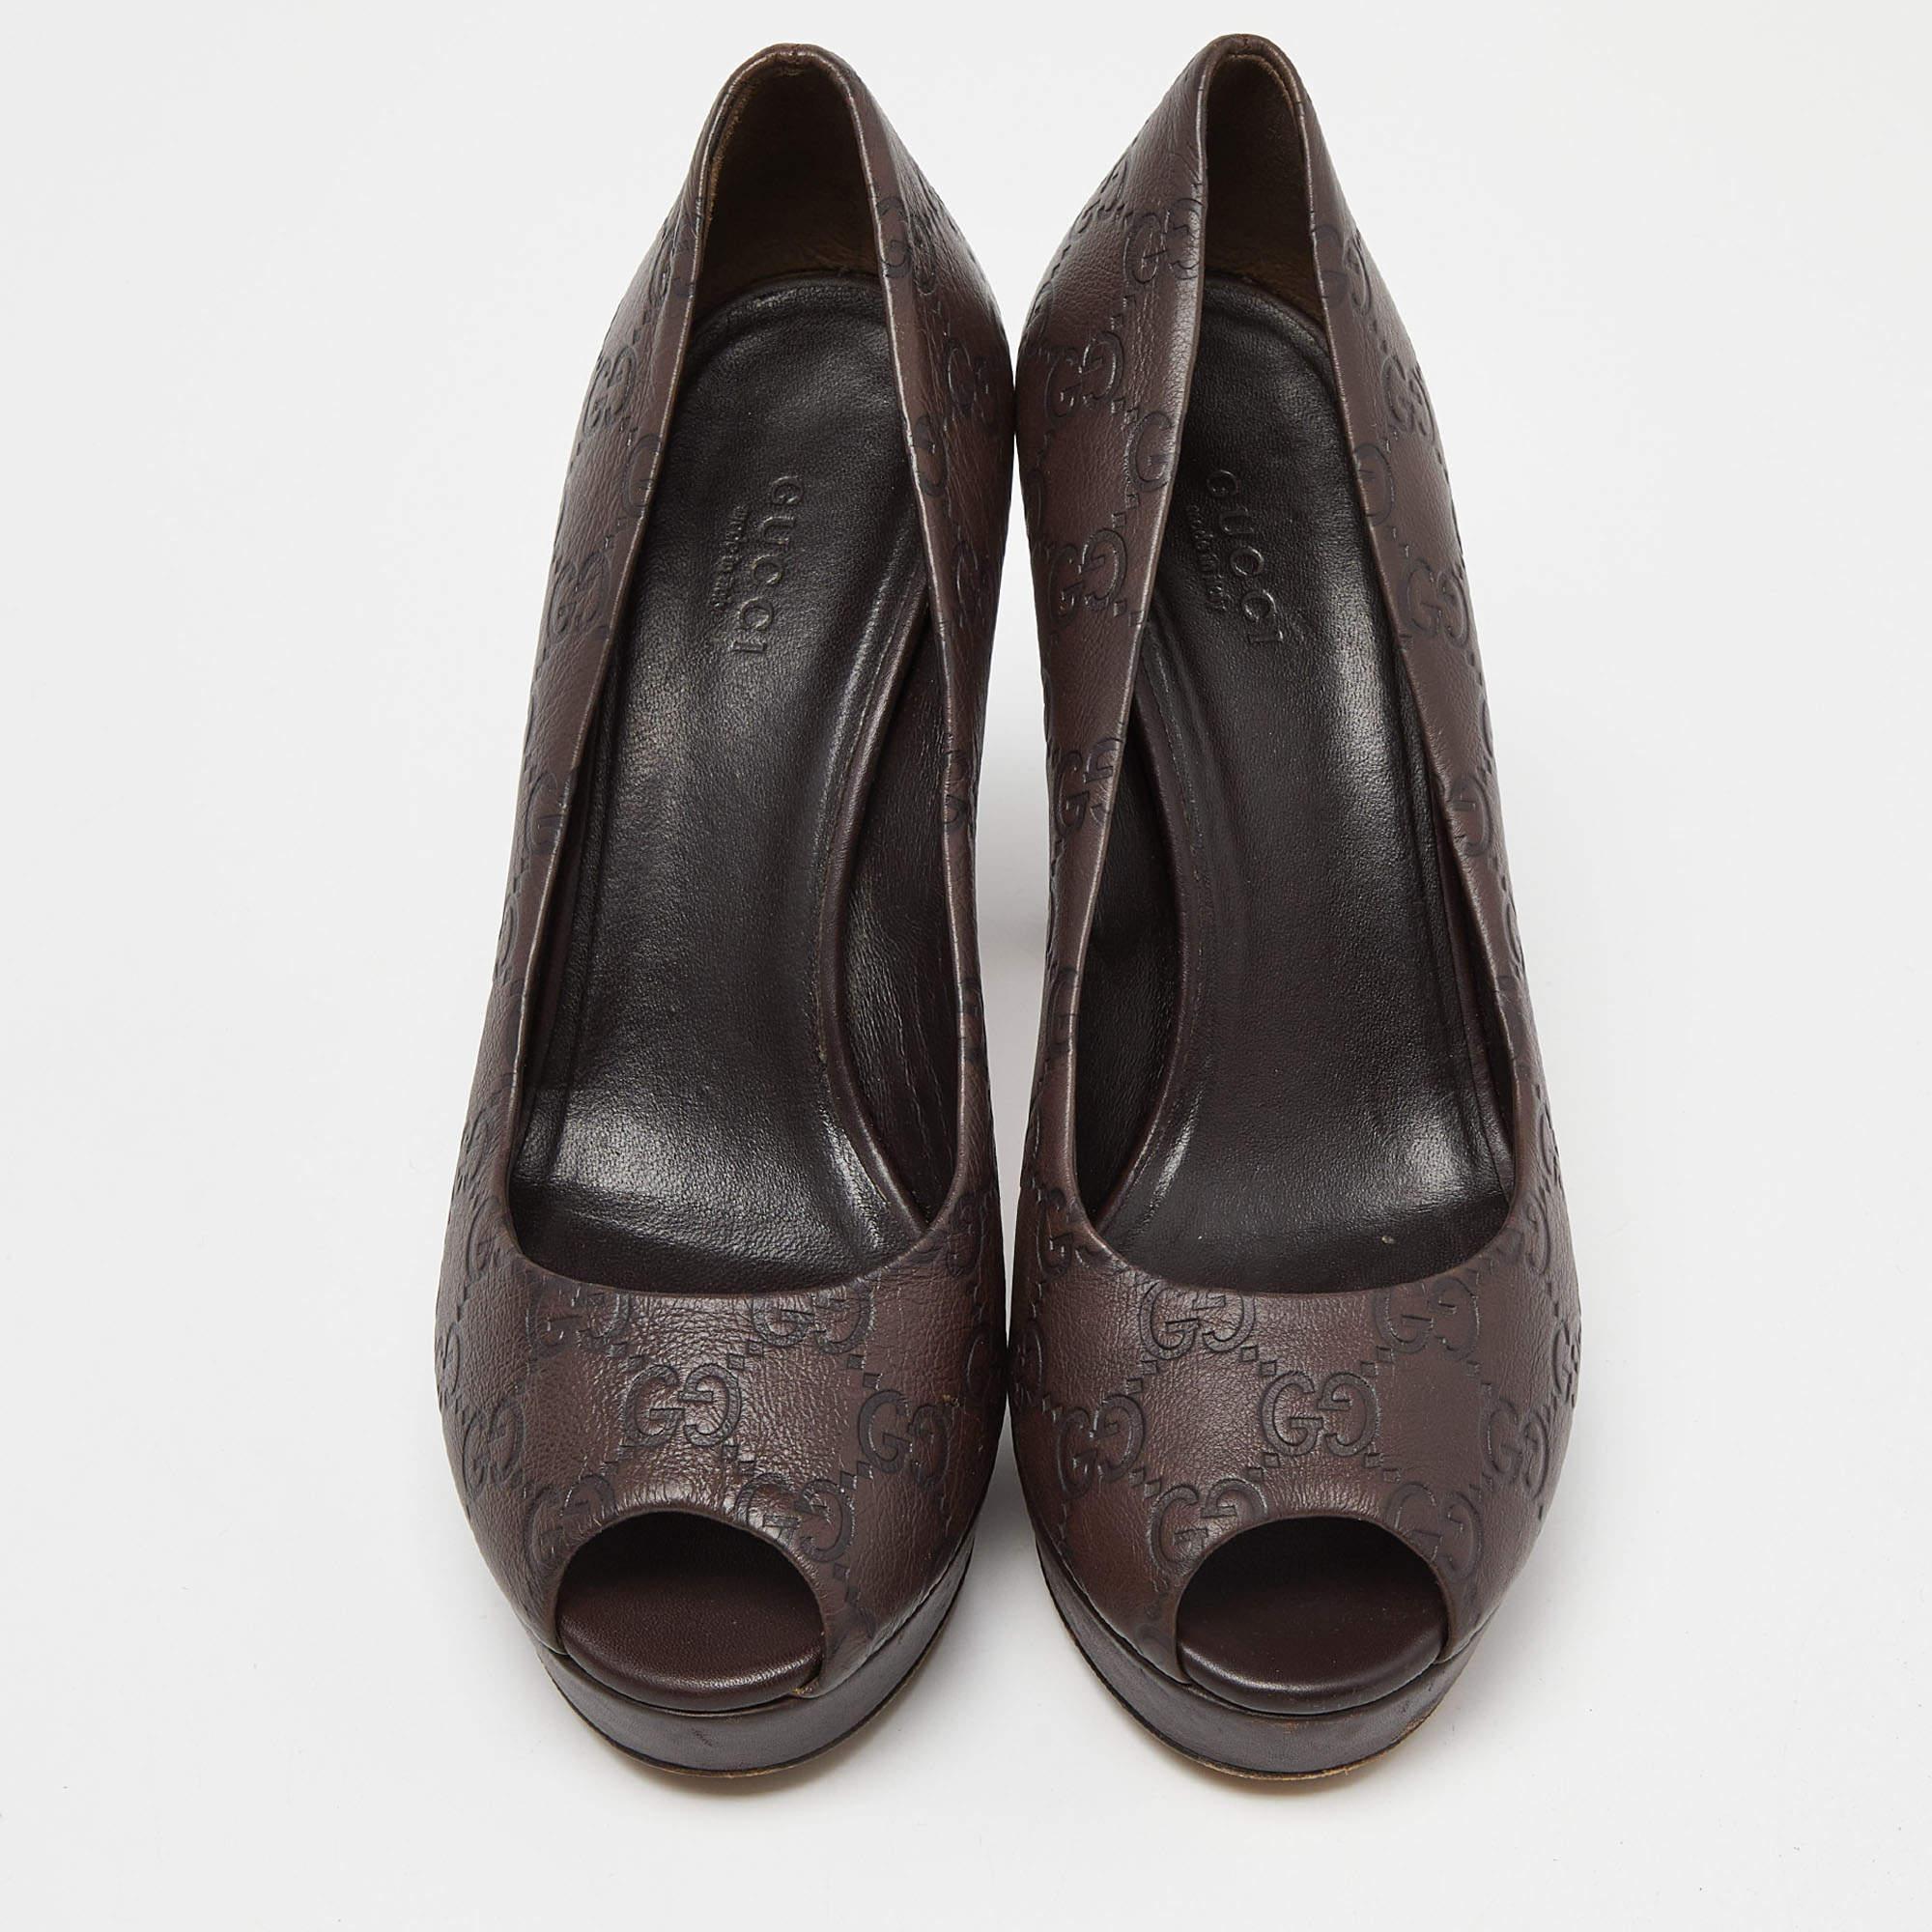 These Gucci pumps blend comfort and style perfectly! The brown pumps are crafted from Guccissima leather into a peep-toe silhouette and are elevated on slim heels.

 Includes: Original Dustbag, Original Box

